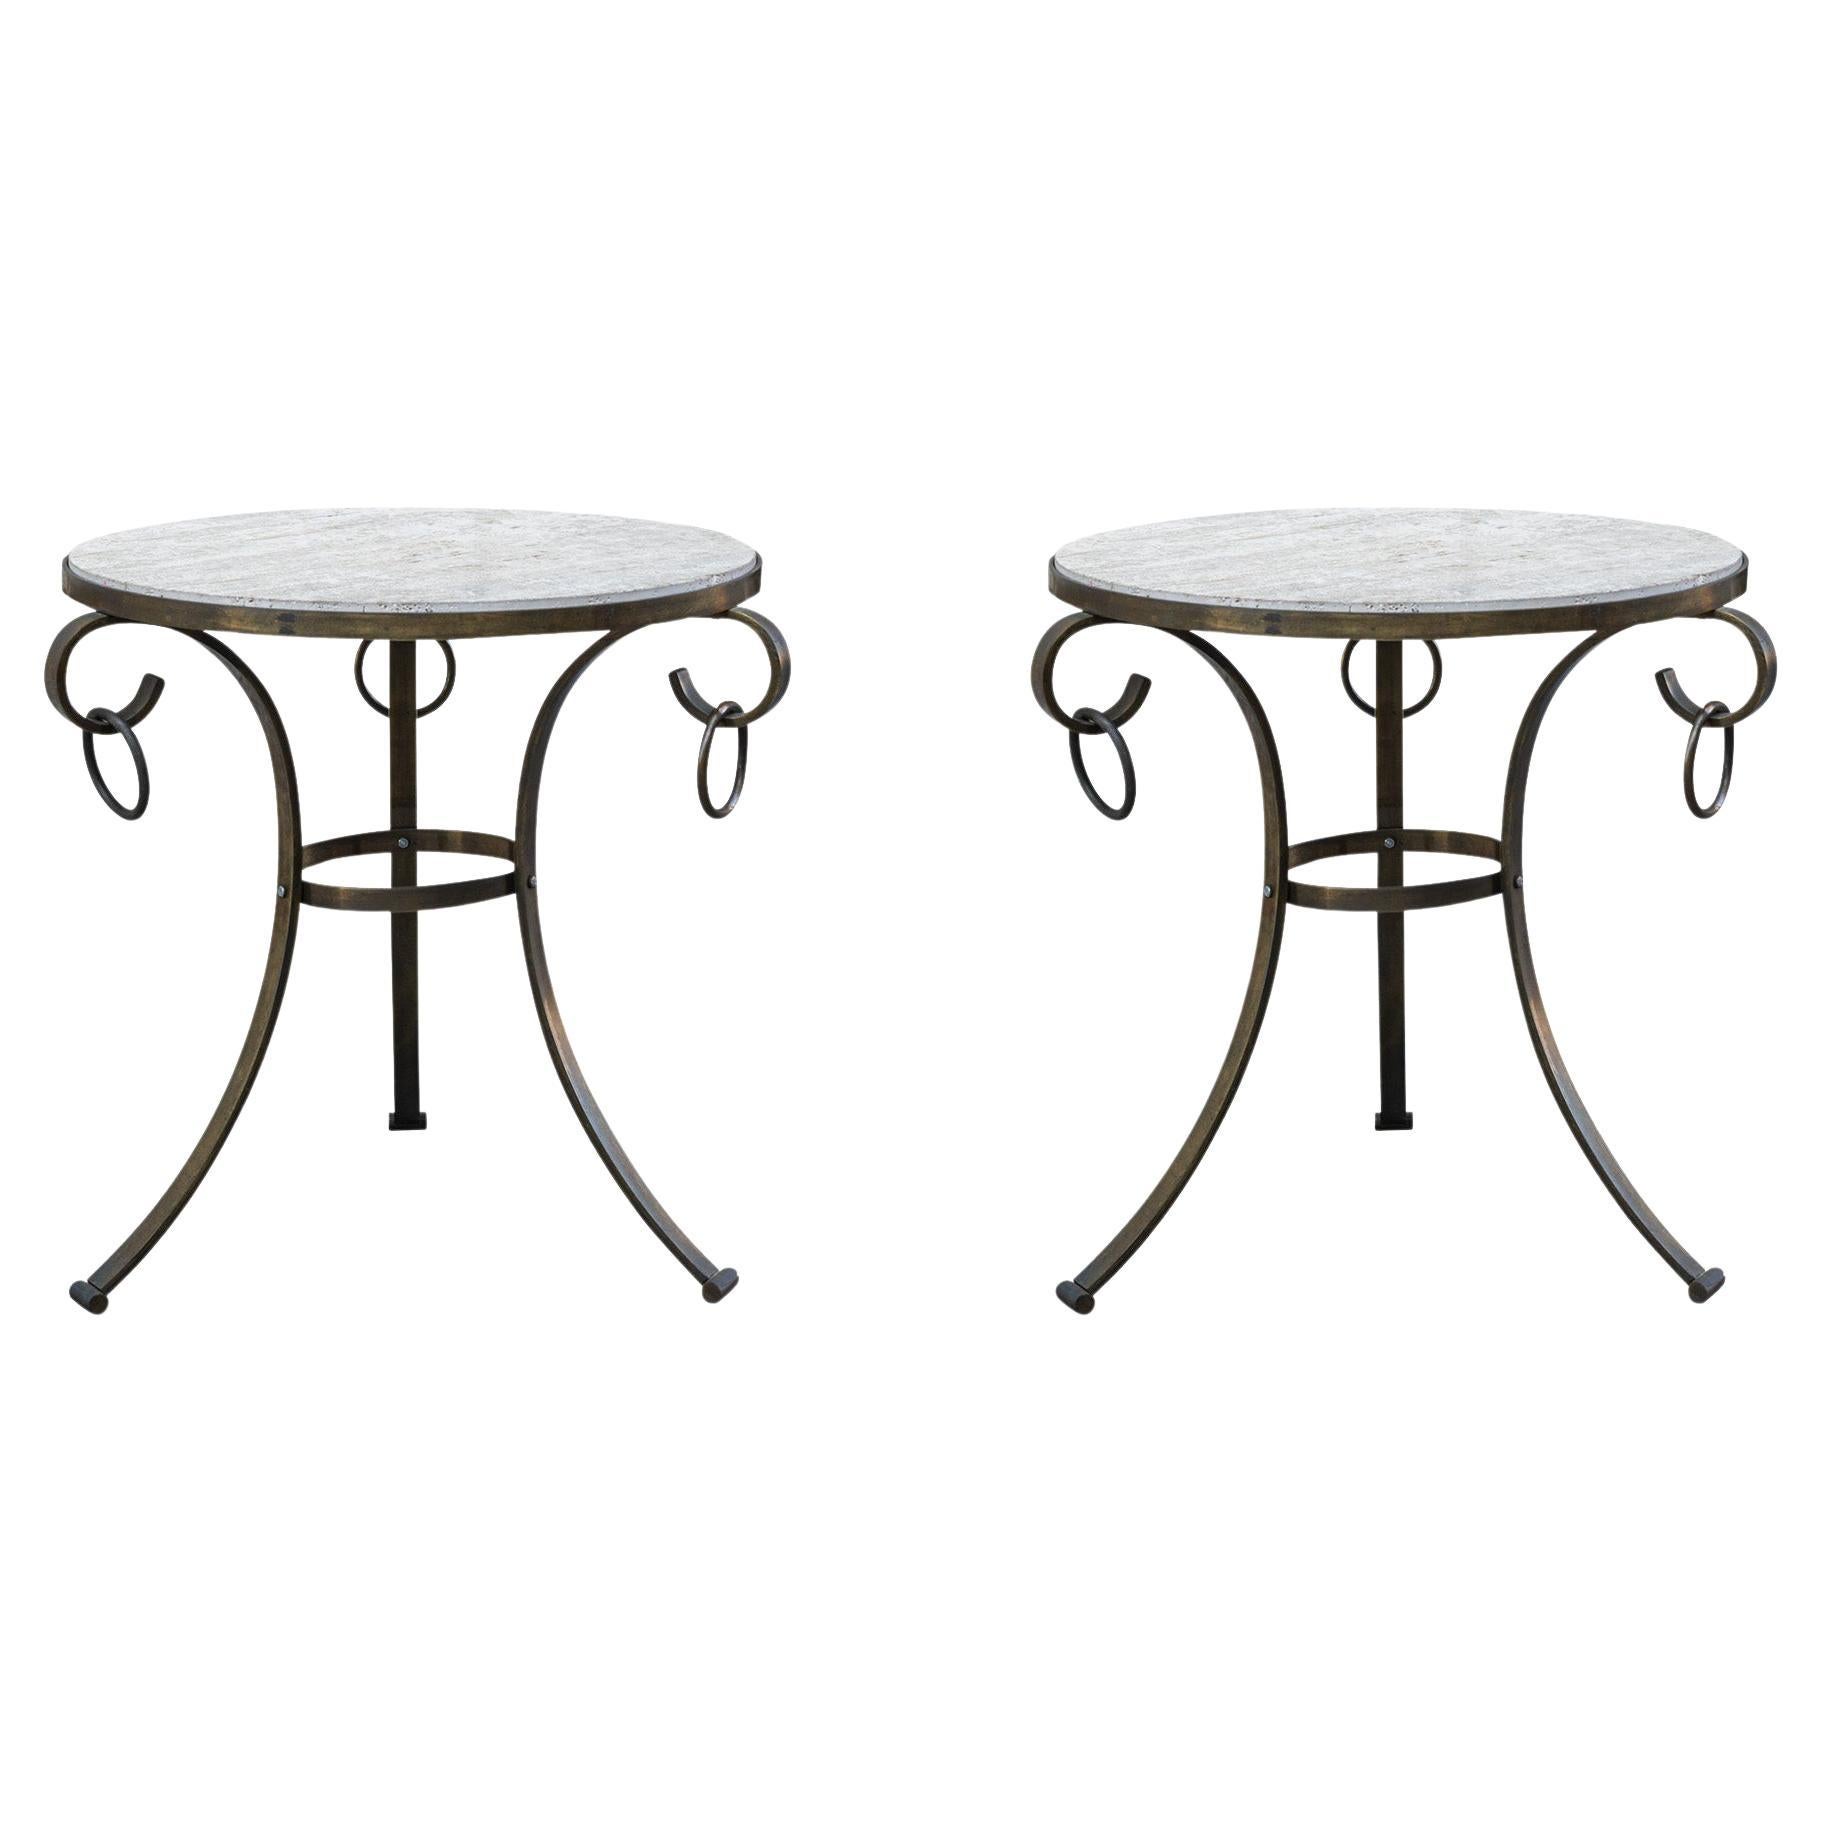 Pair of Neo Classic Pedestal Tables, Silver Iron and Brass Frame, Travertine Top